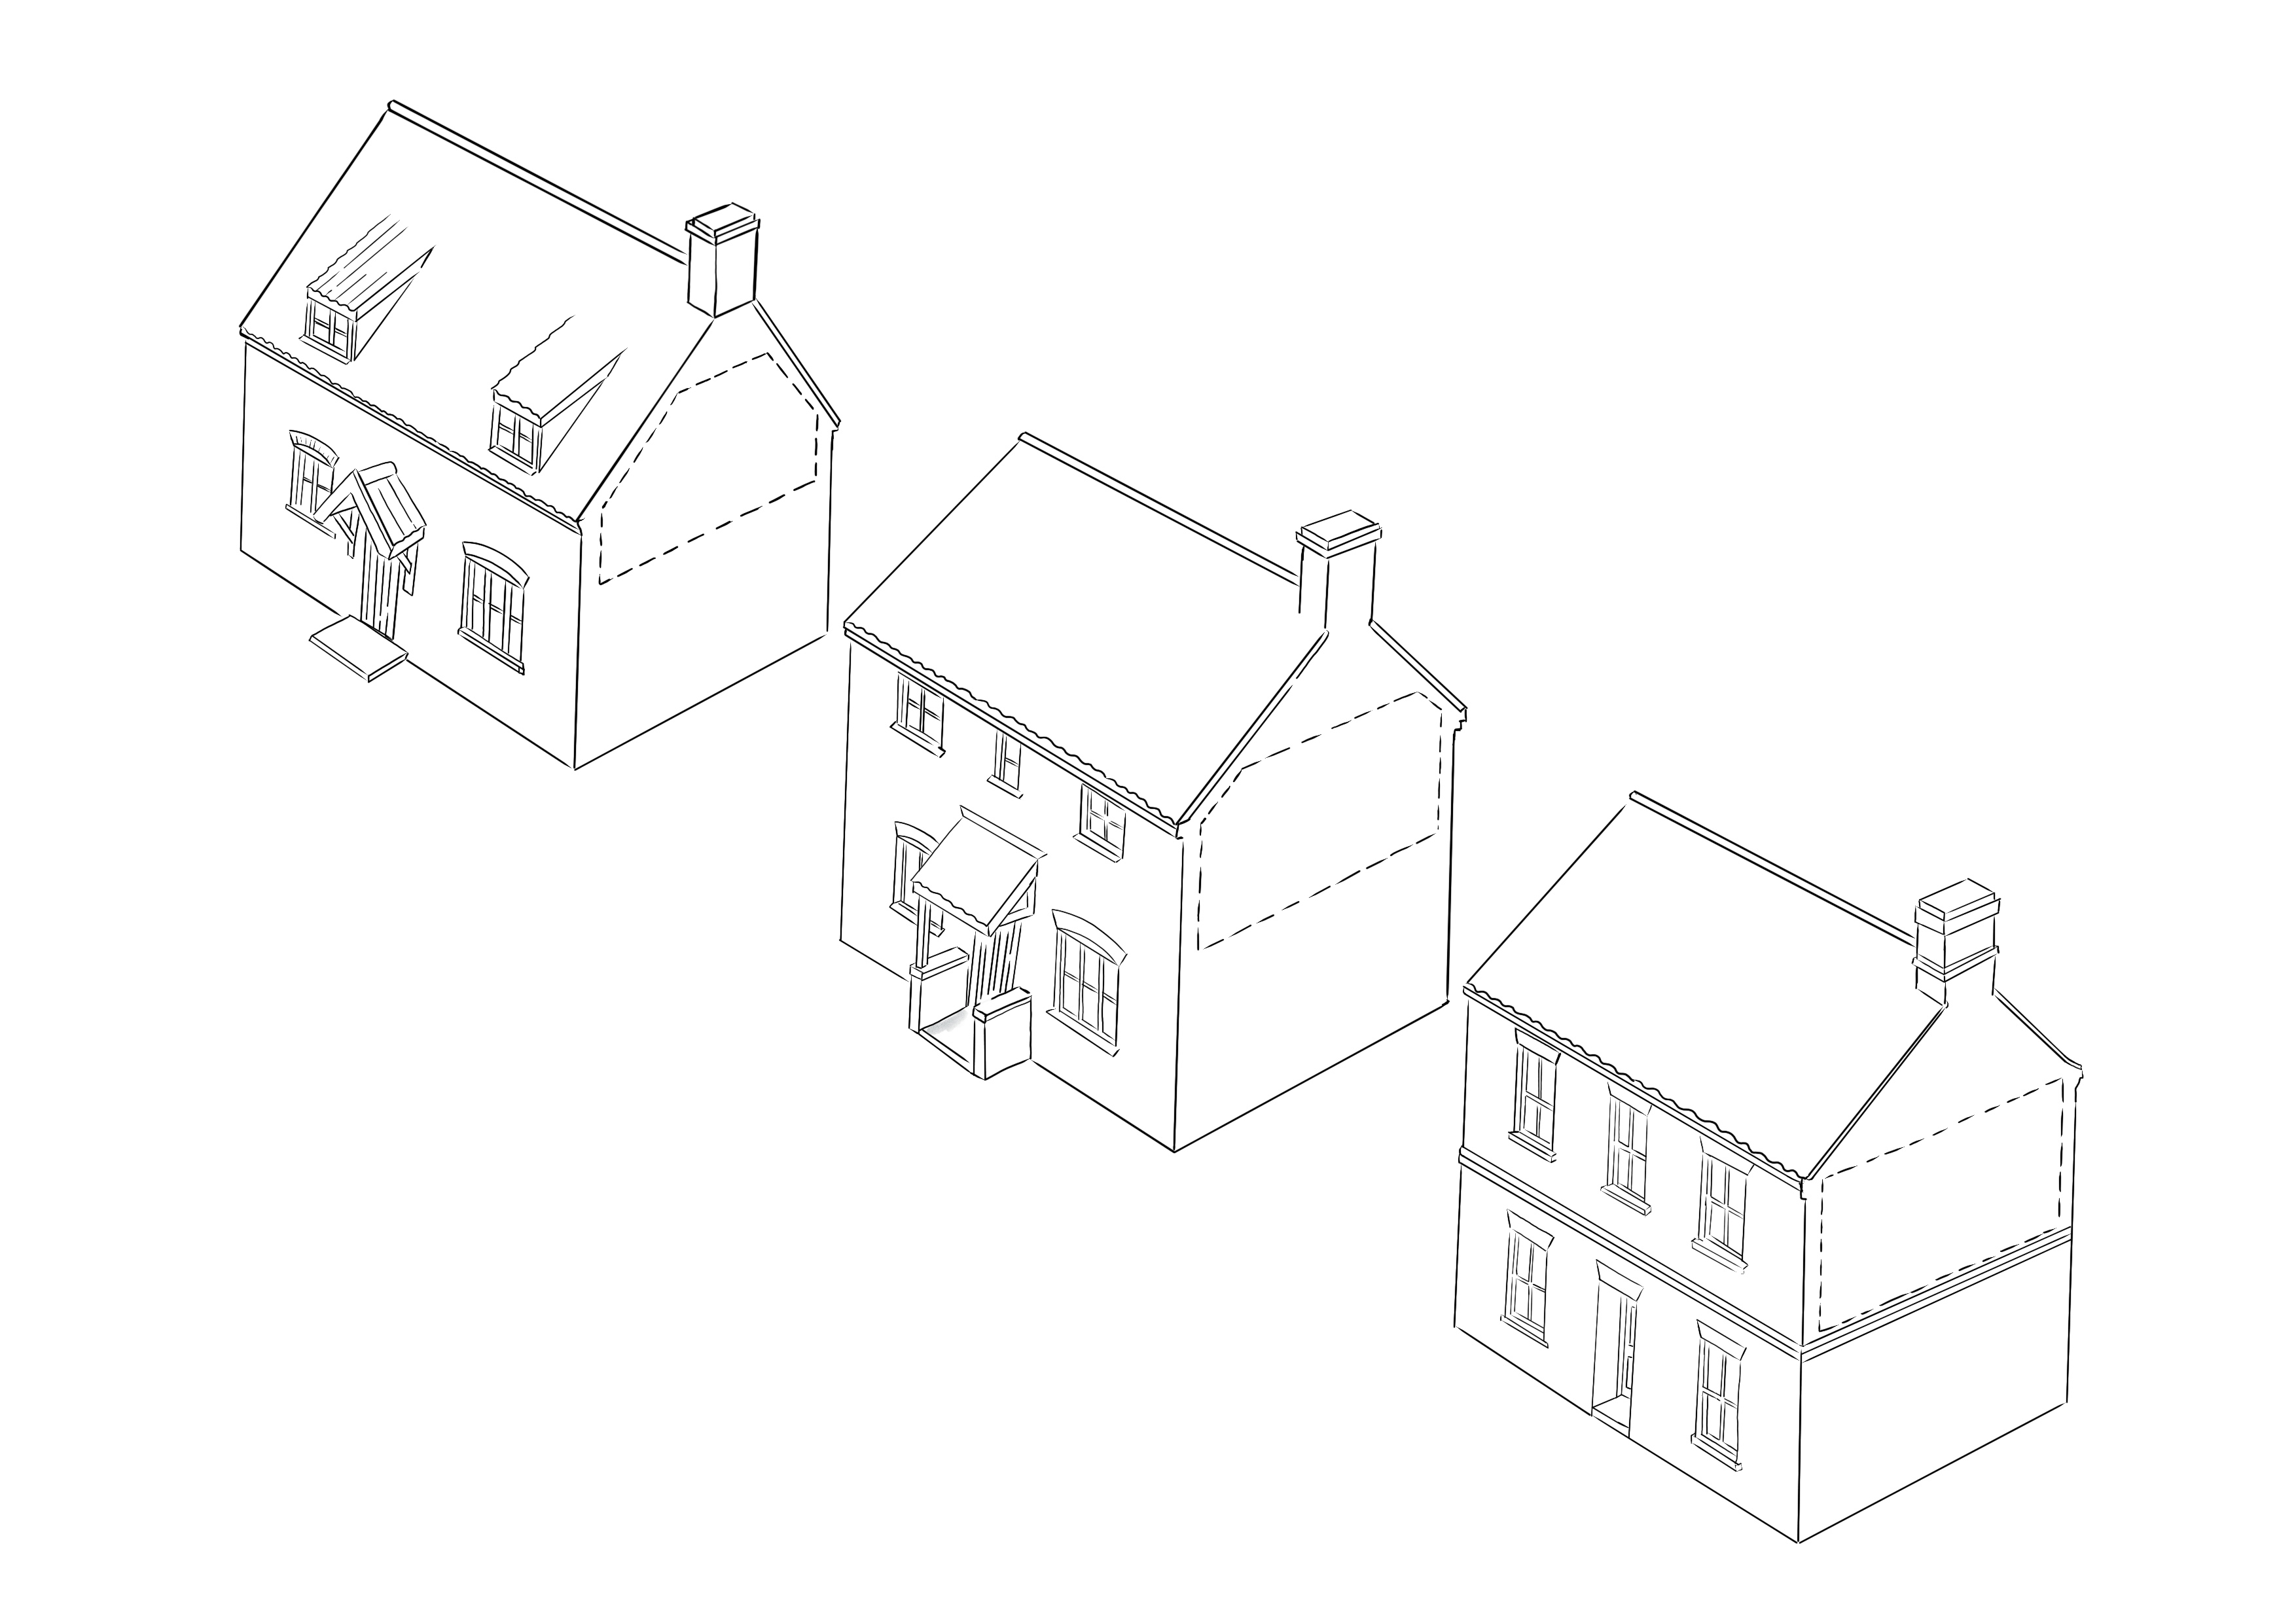 An illustration of how designs based on the same floor plan can be adapted in scale and style to suit a rural or urban setting